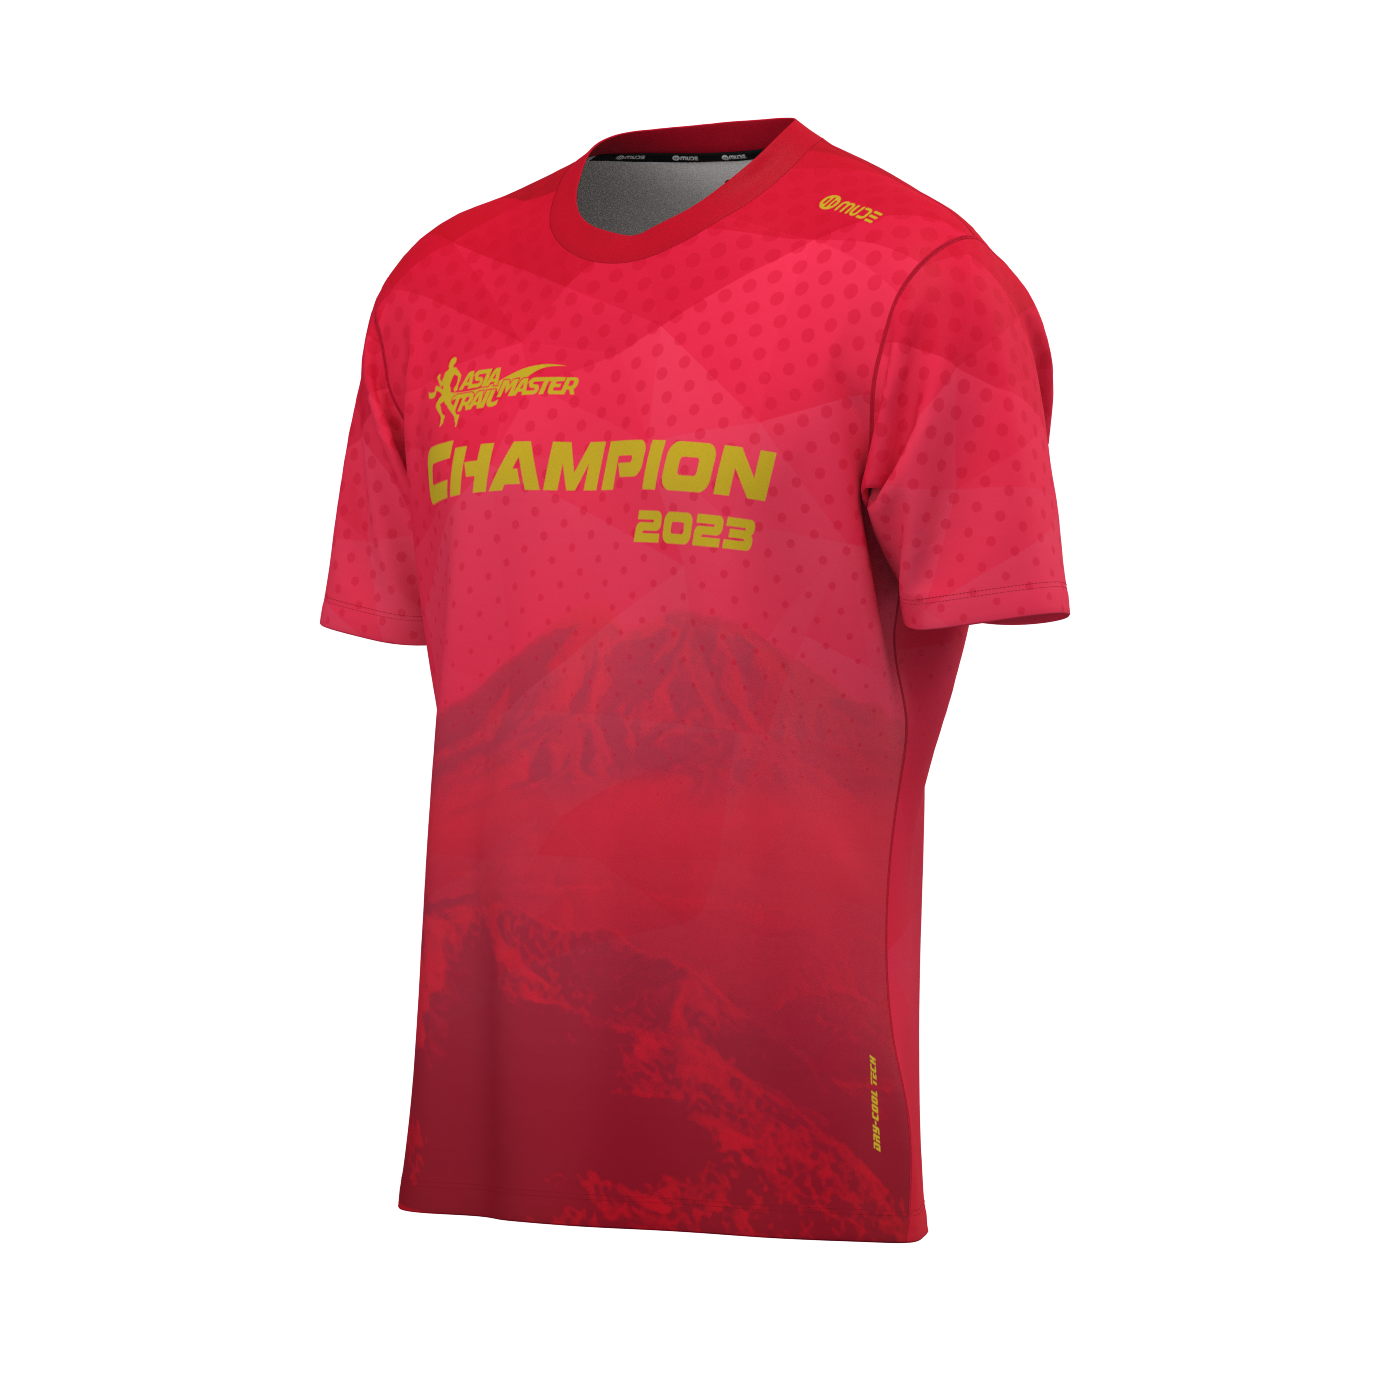 ATM Final -Tee - Champion front.png